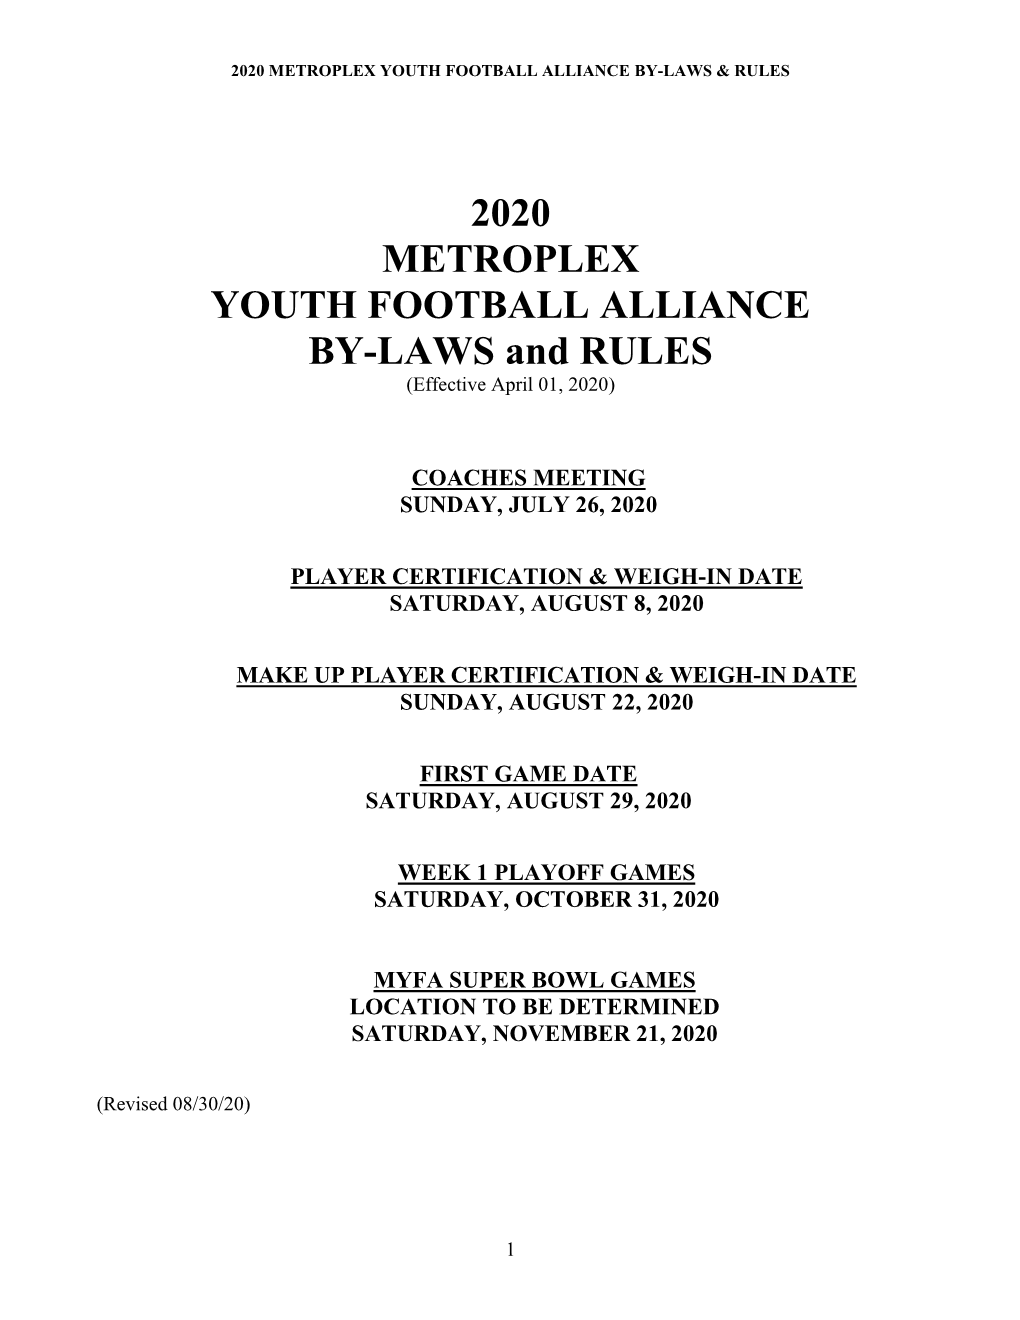 2020 Metroplex Youth Football Alliance By-Laws & Rules